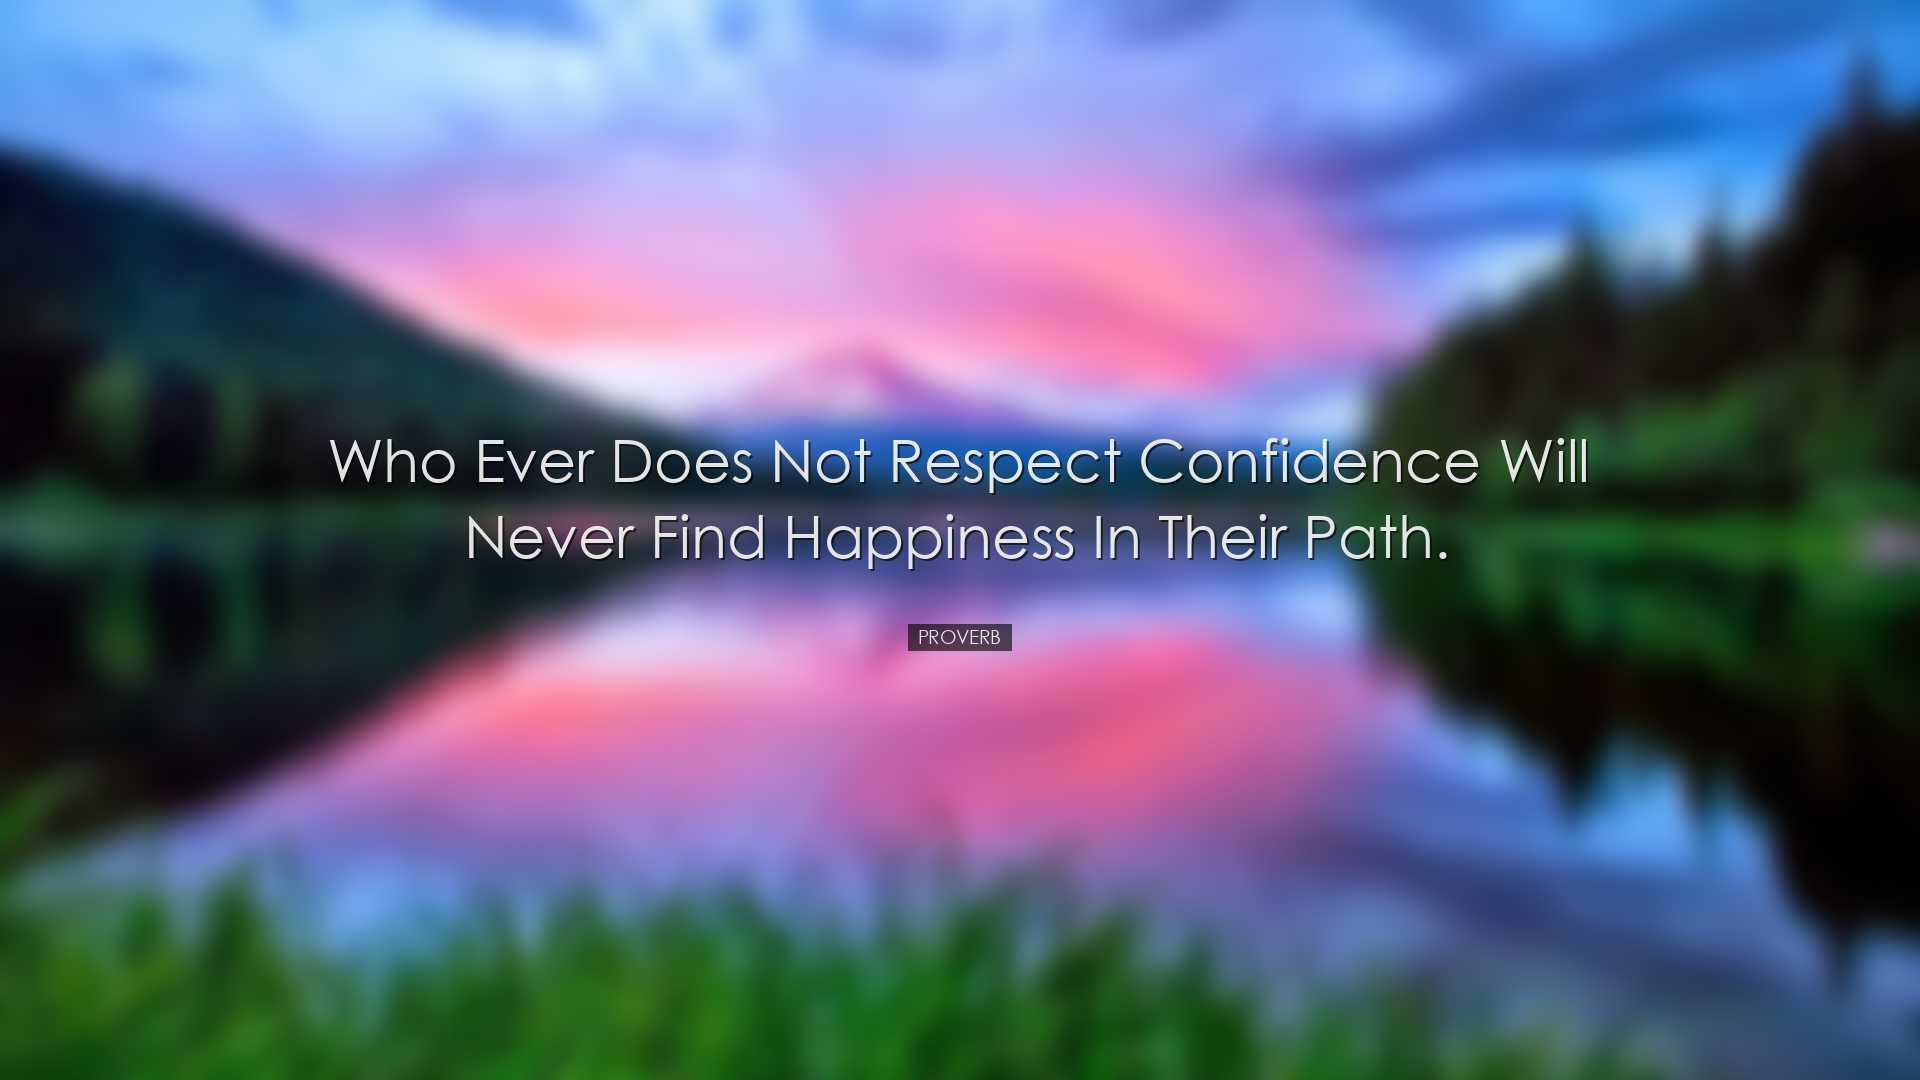 Who ever does not respect confidence will never find happiness in